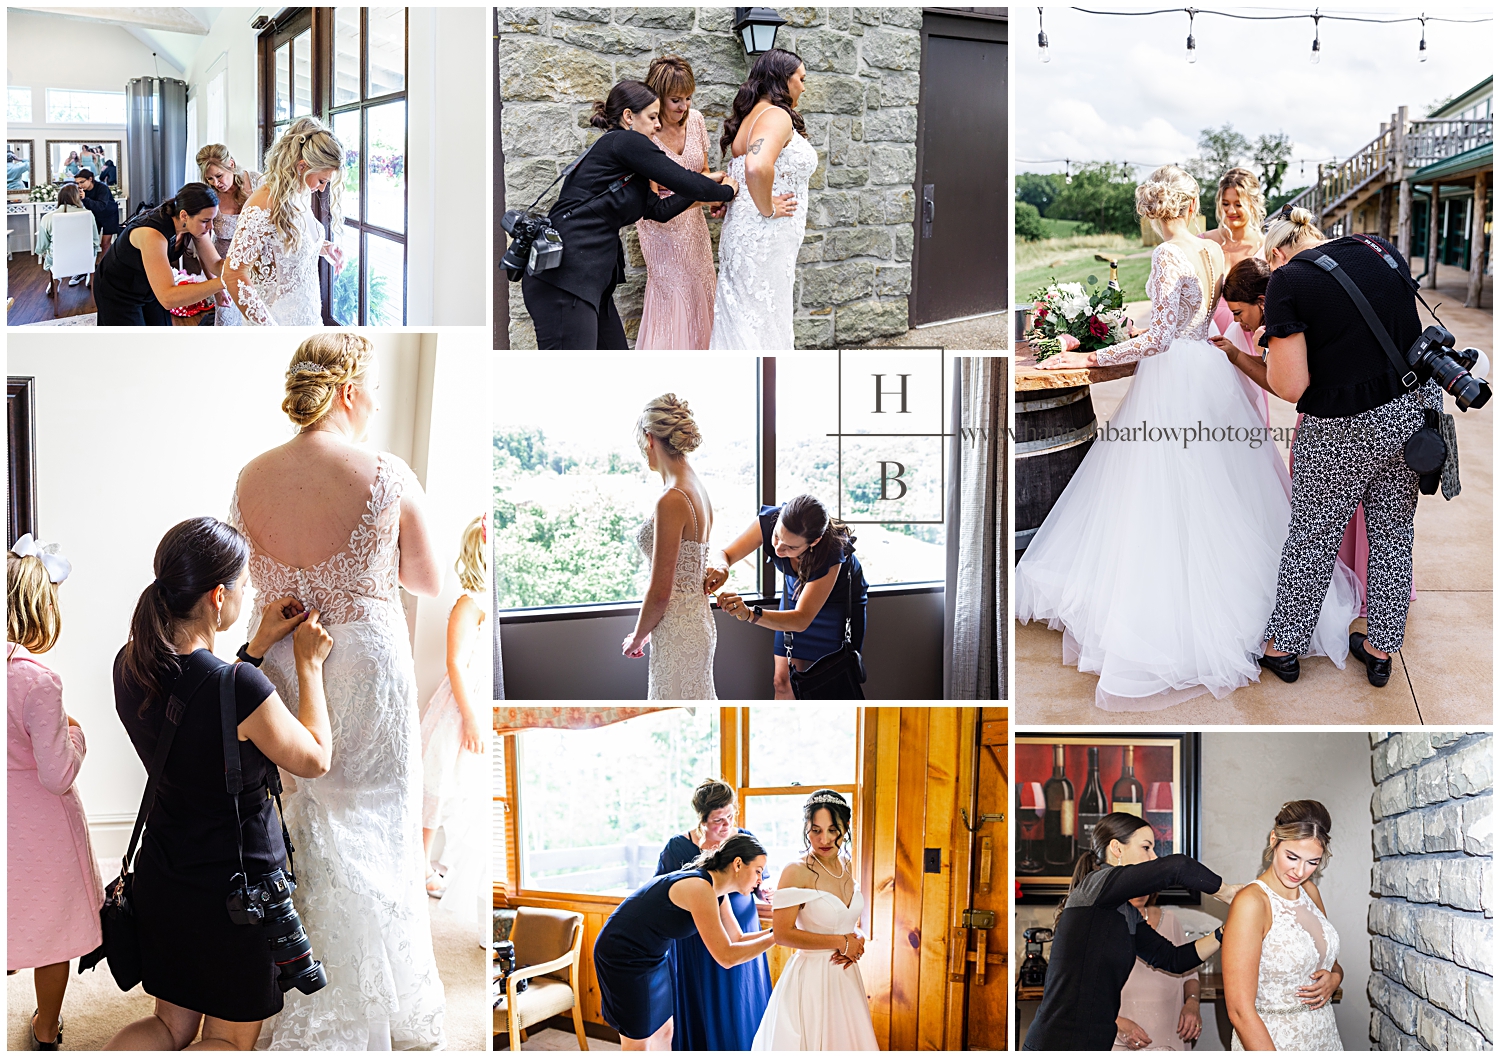 Collage of wedding photographer helping brides with dresses